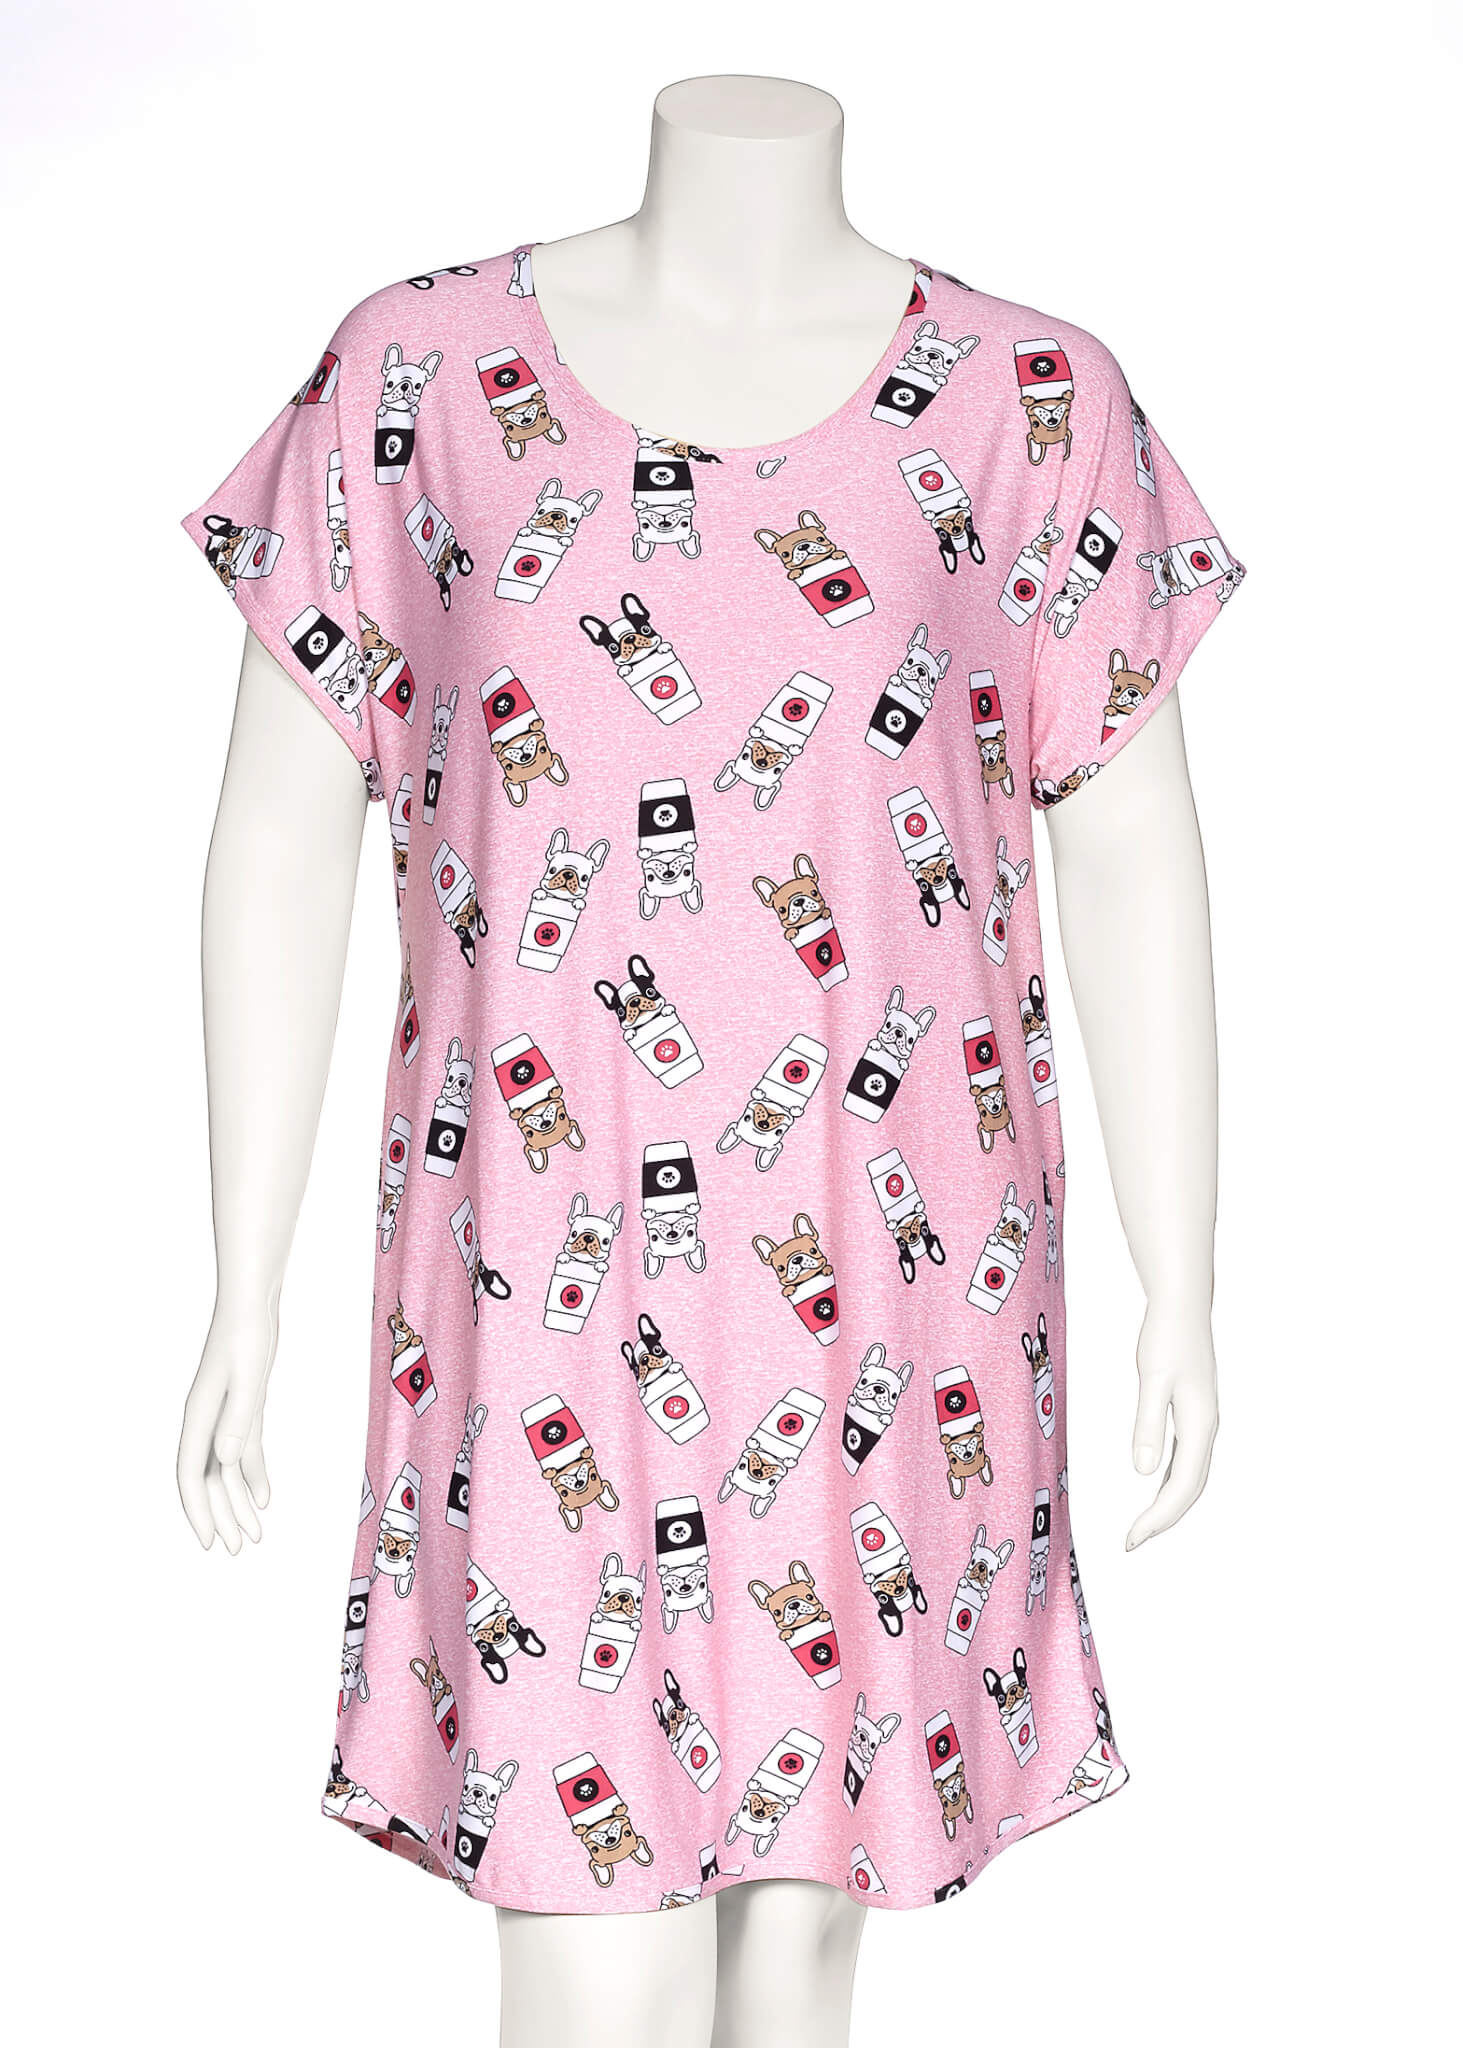 Nightshirt- Plus Size Women's Printed- Otters